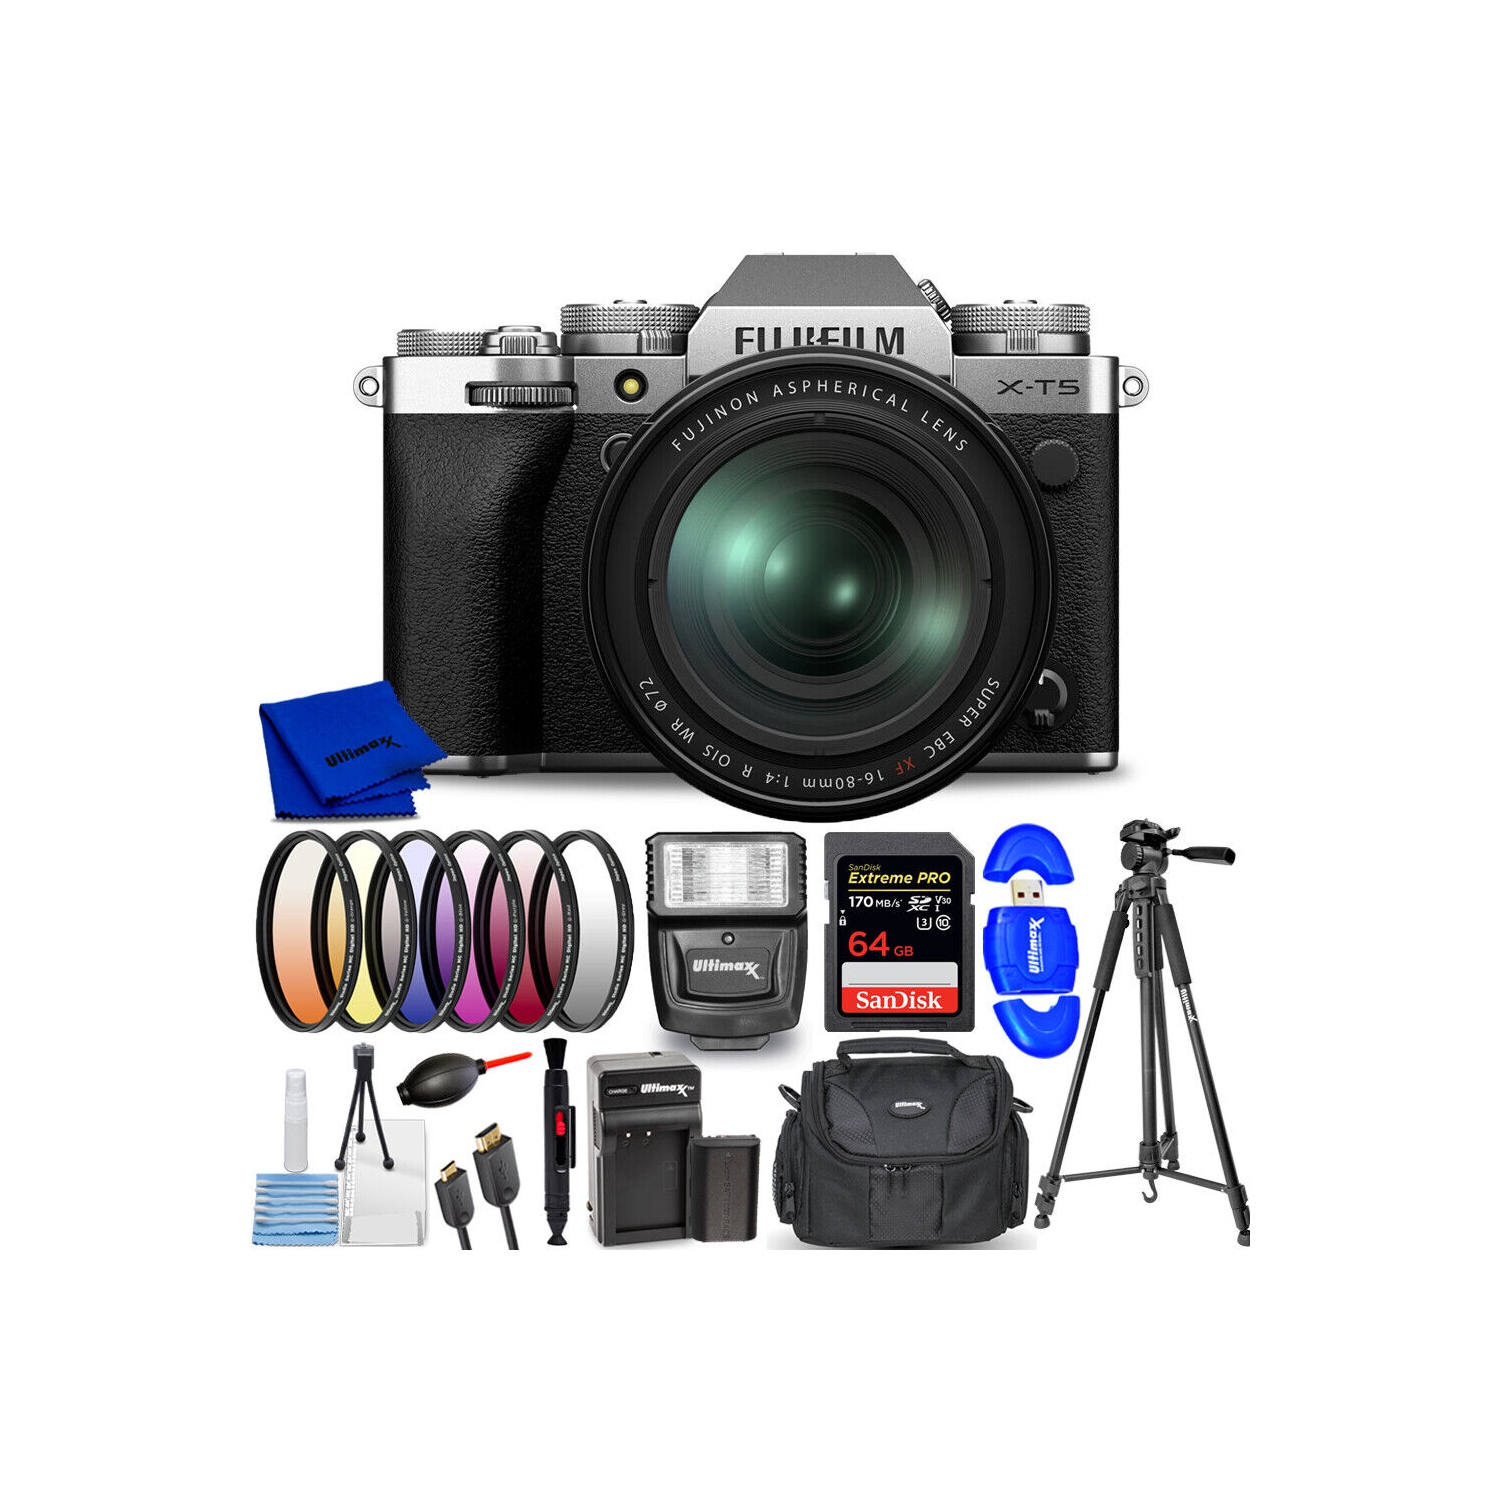 FUJIFILM X-T5 Mirrorless Camera with 16-80mm Lens Silver - 14PC Accessory Bundle